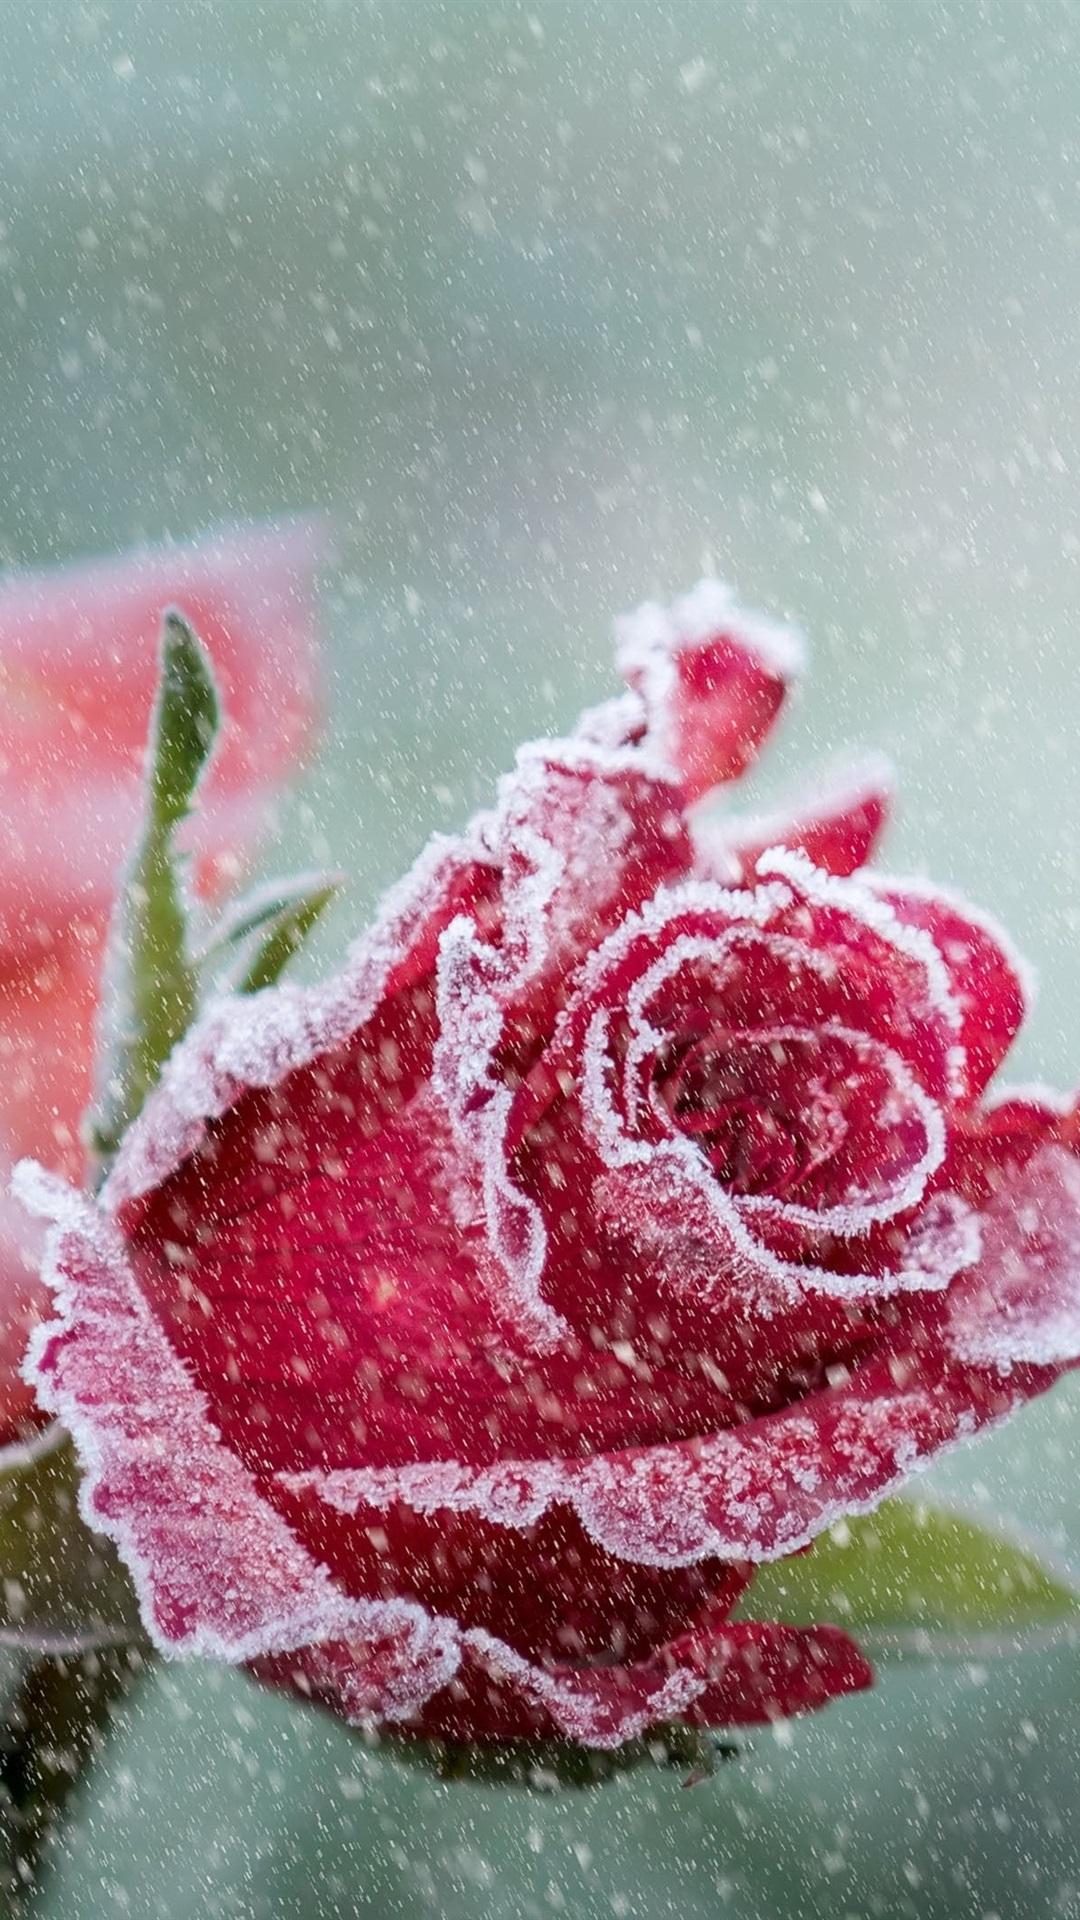 Red Roses, Frost, Snowy 1080x1920 IPhone 8 7 6 6S Plus Wallpaper